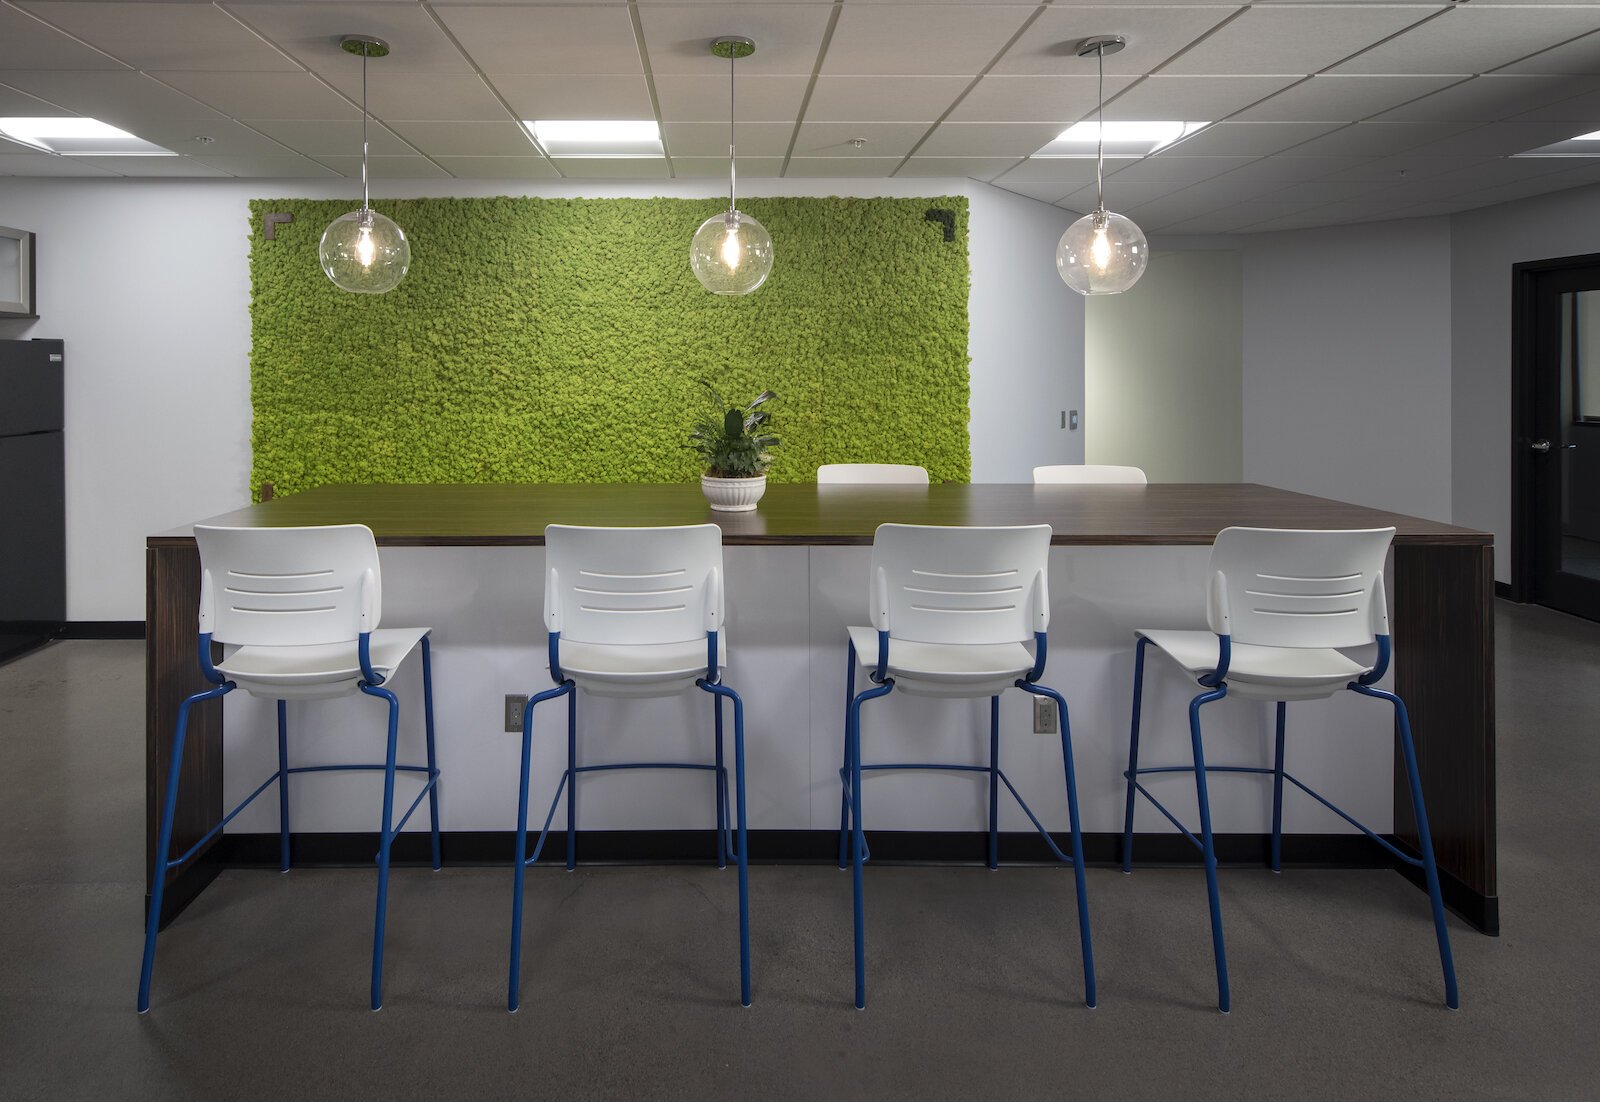 In its work with the Northeast Indiana Regional Partnership, Design Collaborative incorporated a “green wall” in the community breakroom to give employees a spark of color.